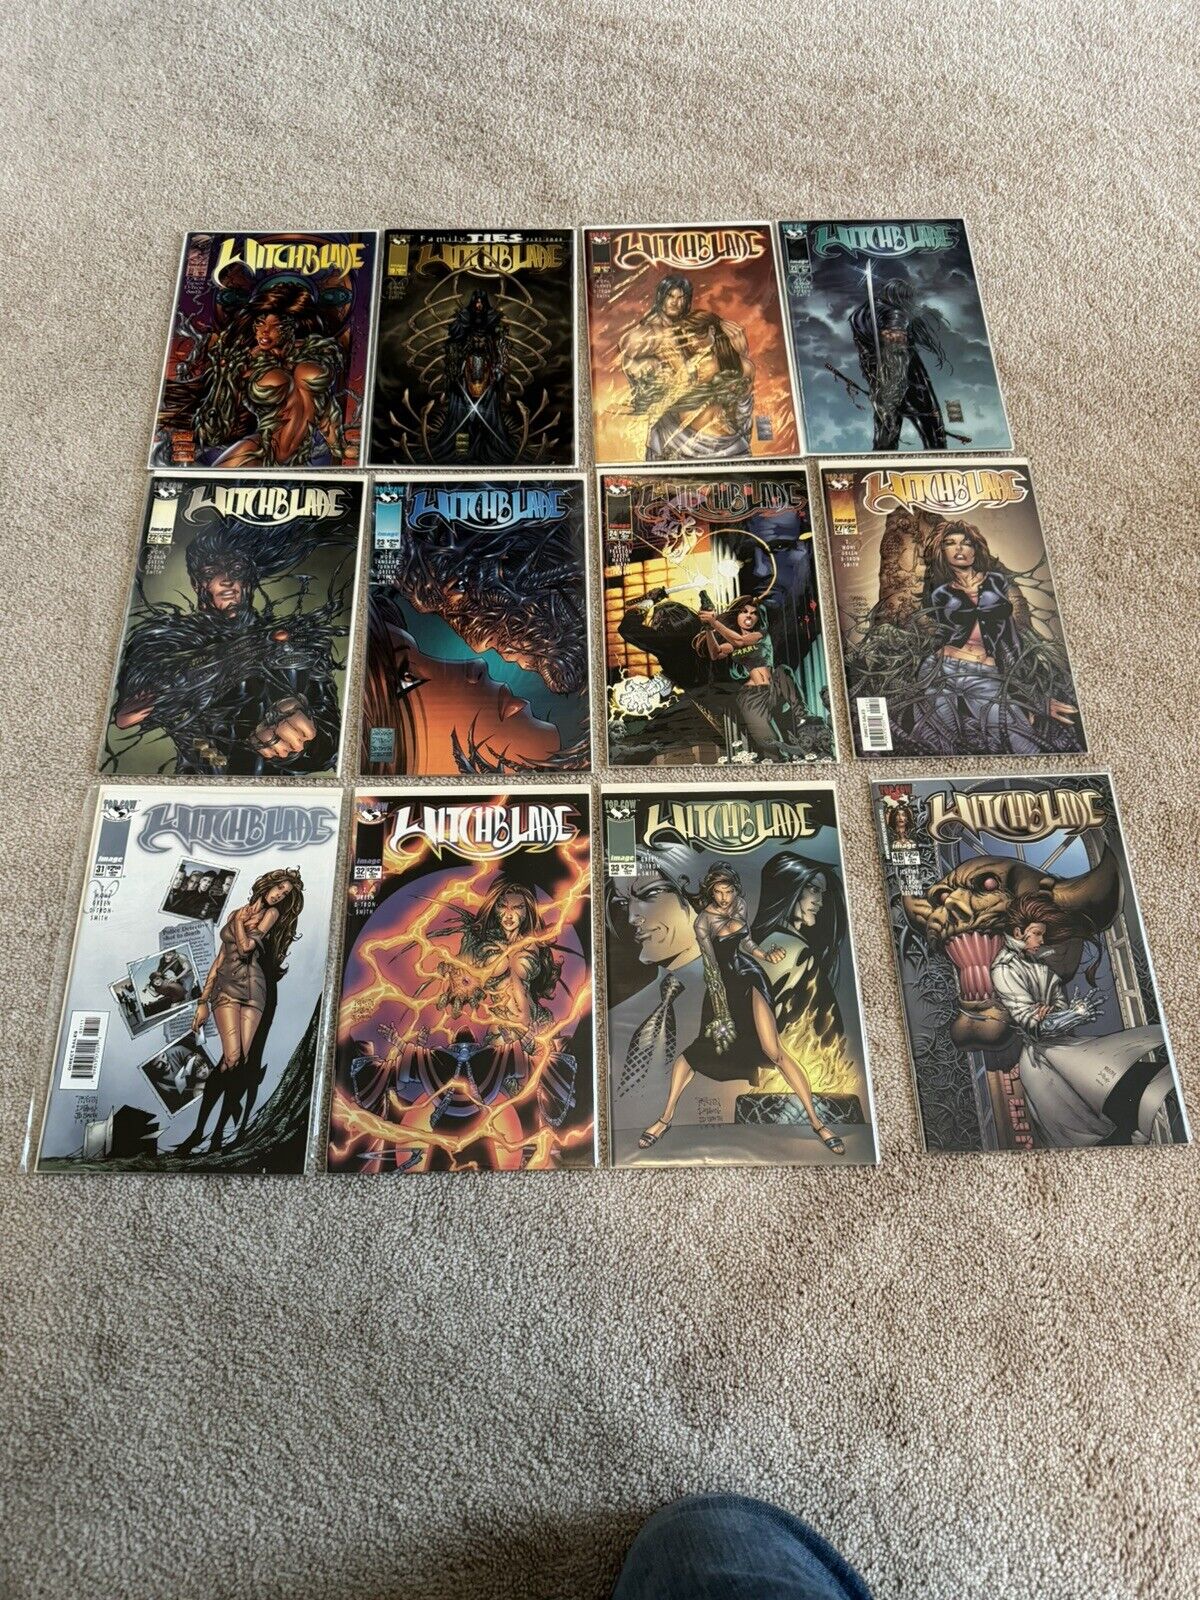 37 Witchblade Comic Book Lot. All Bagged and Boarded